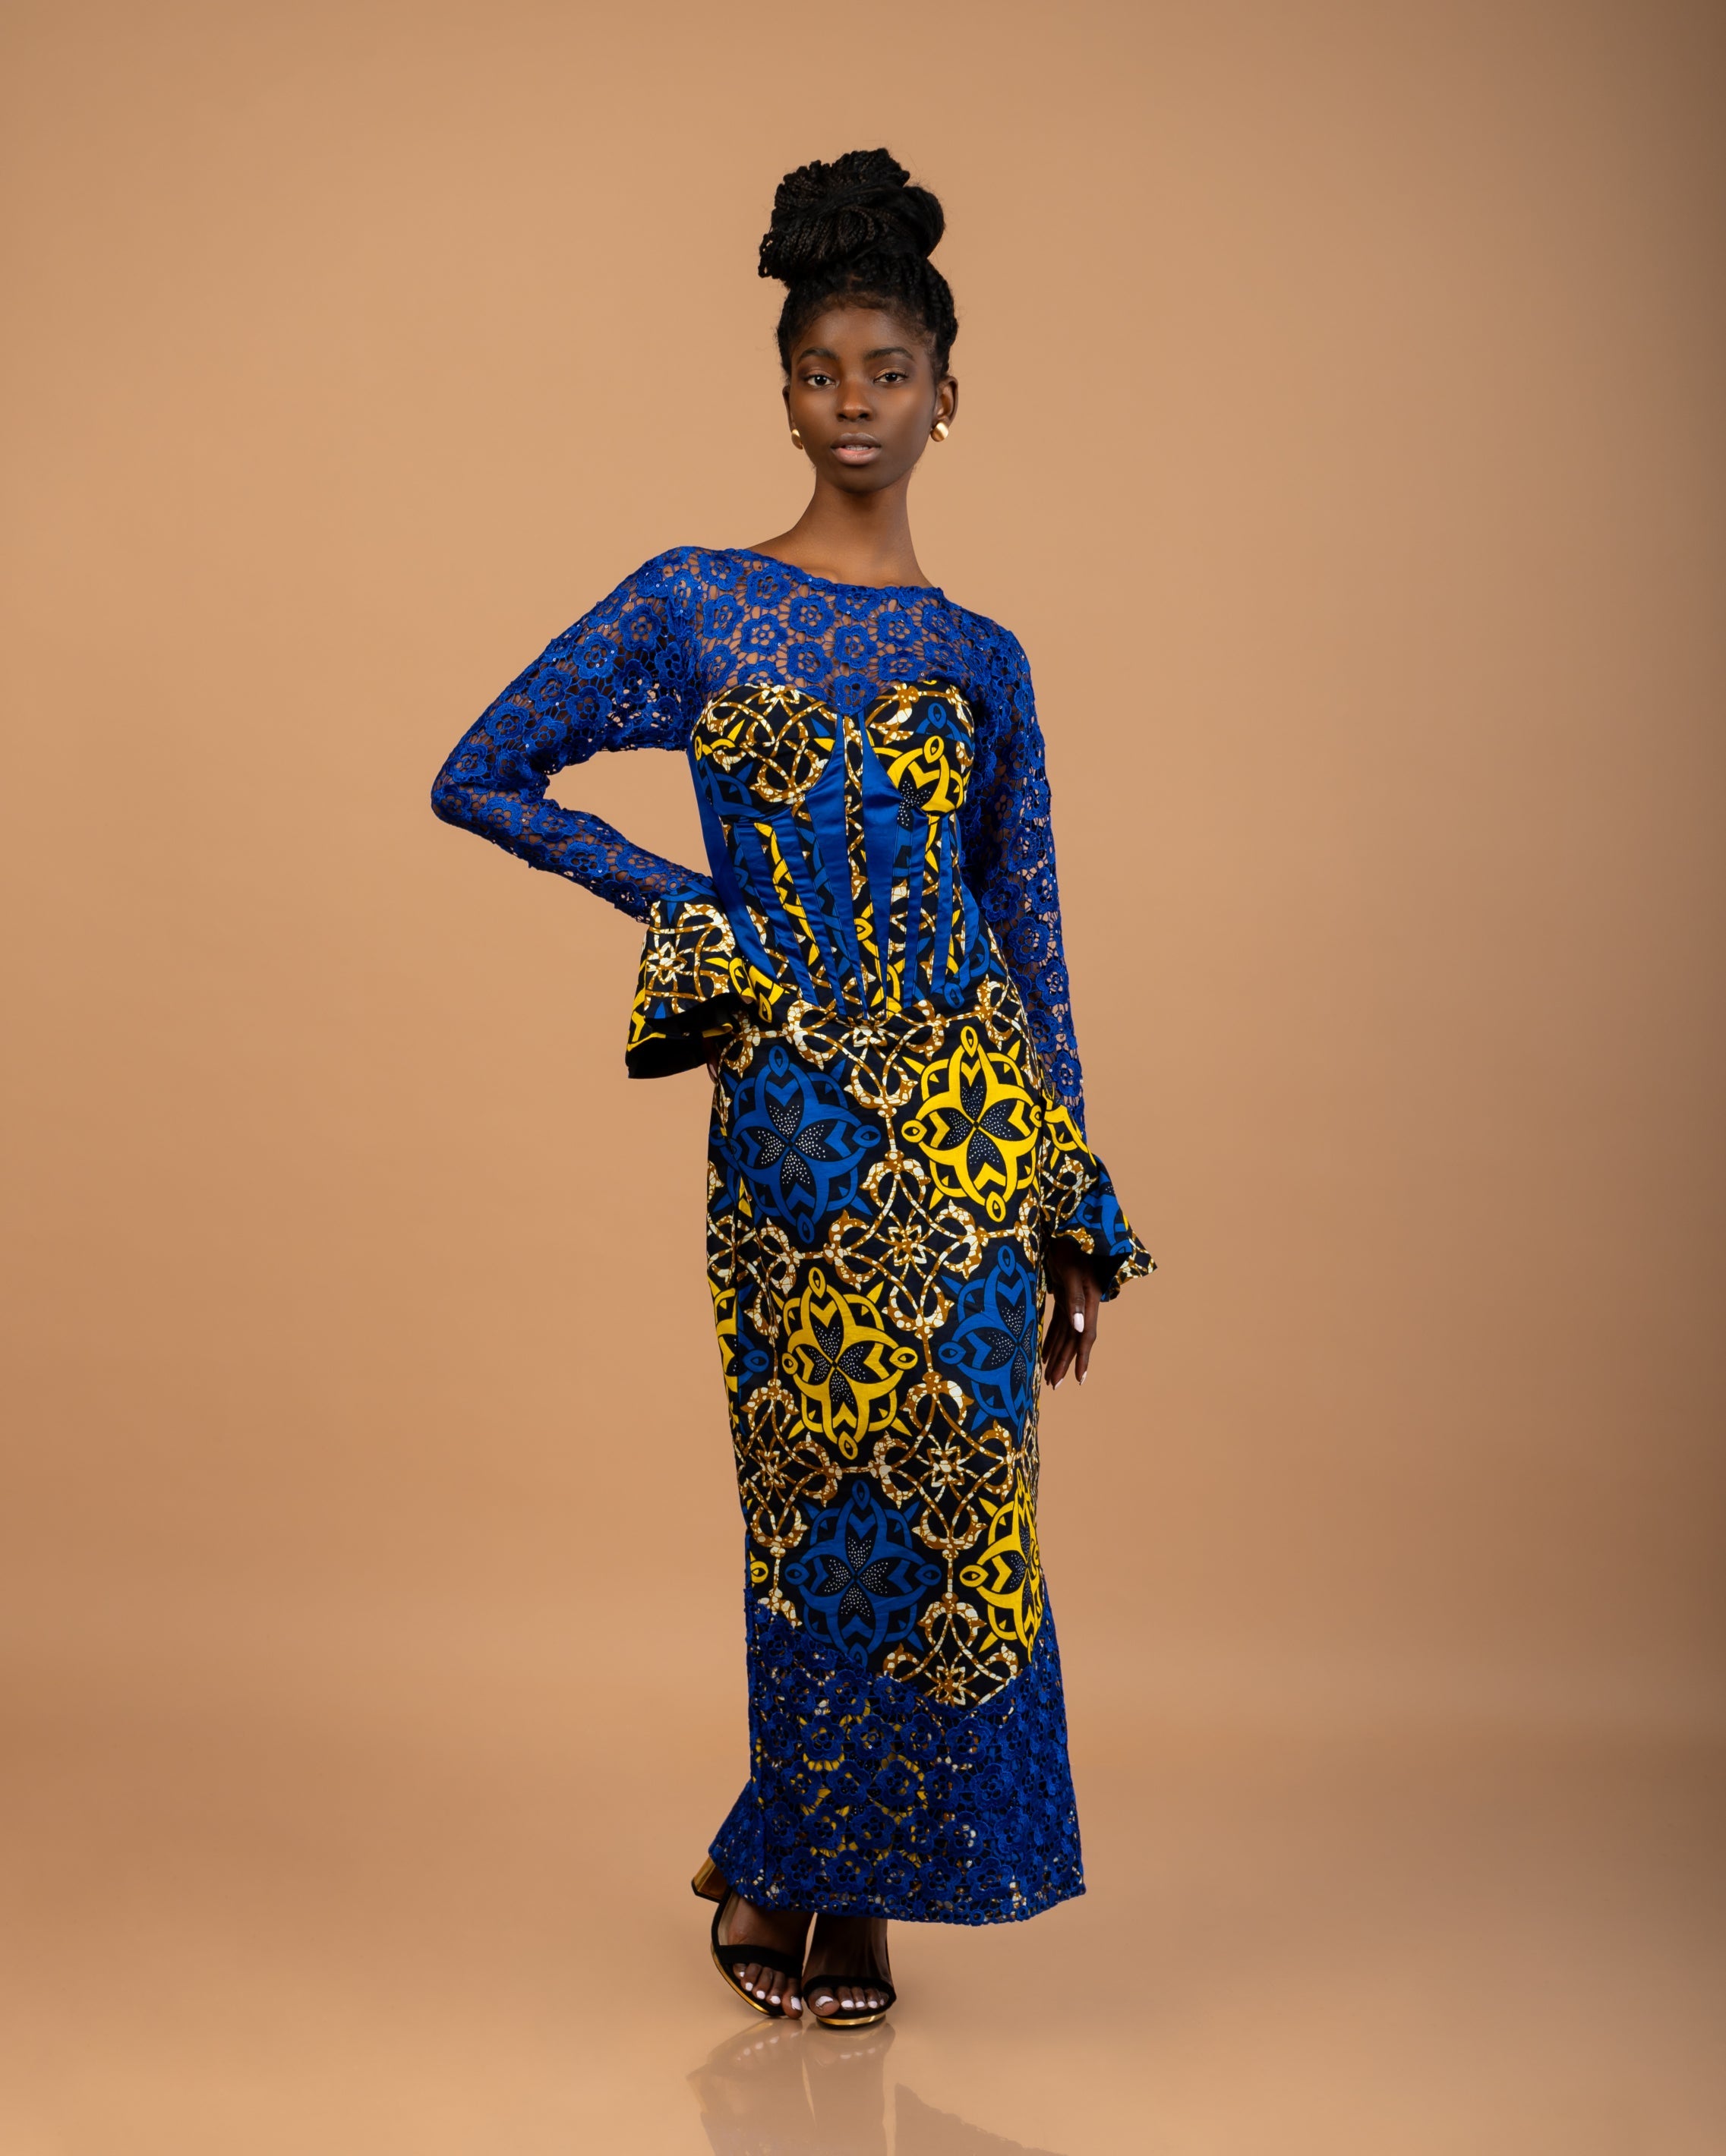 Handmade African Print lace corset floral dress with boning and back:  100% cotton high-quality African Ankara wax fabric